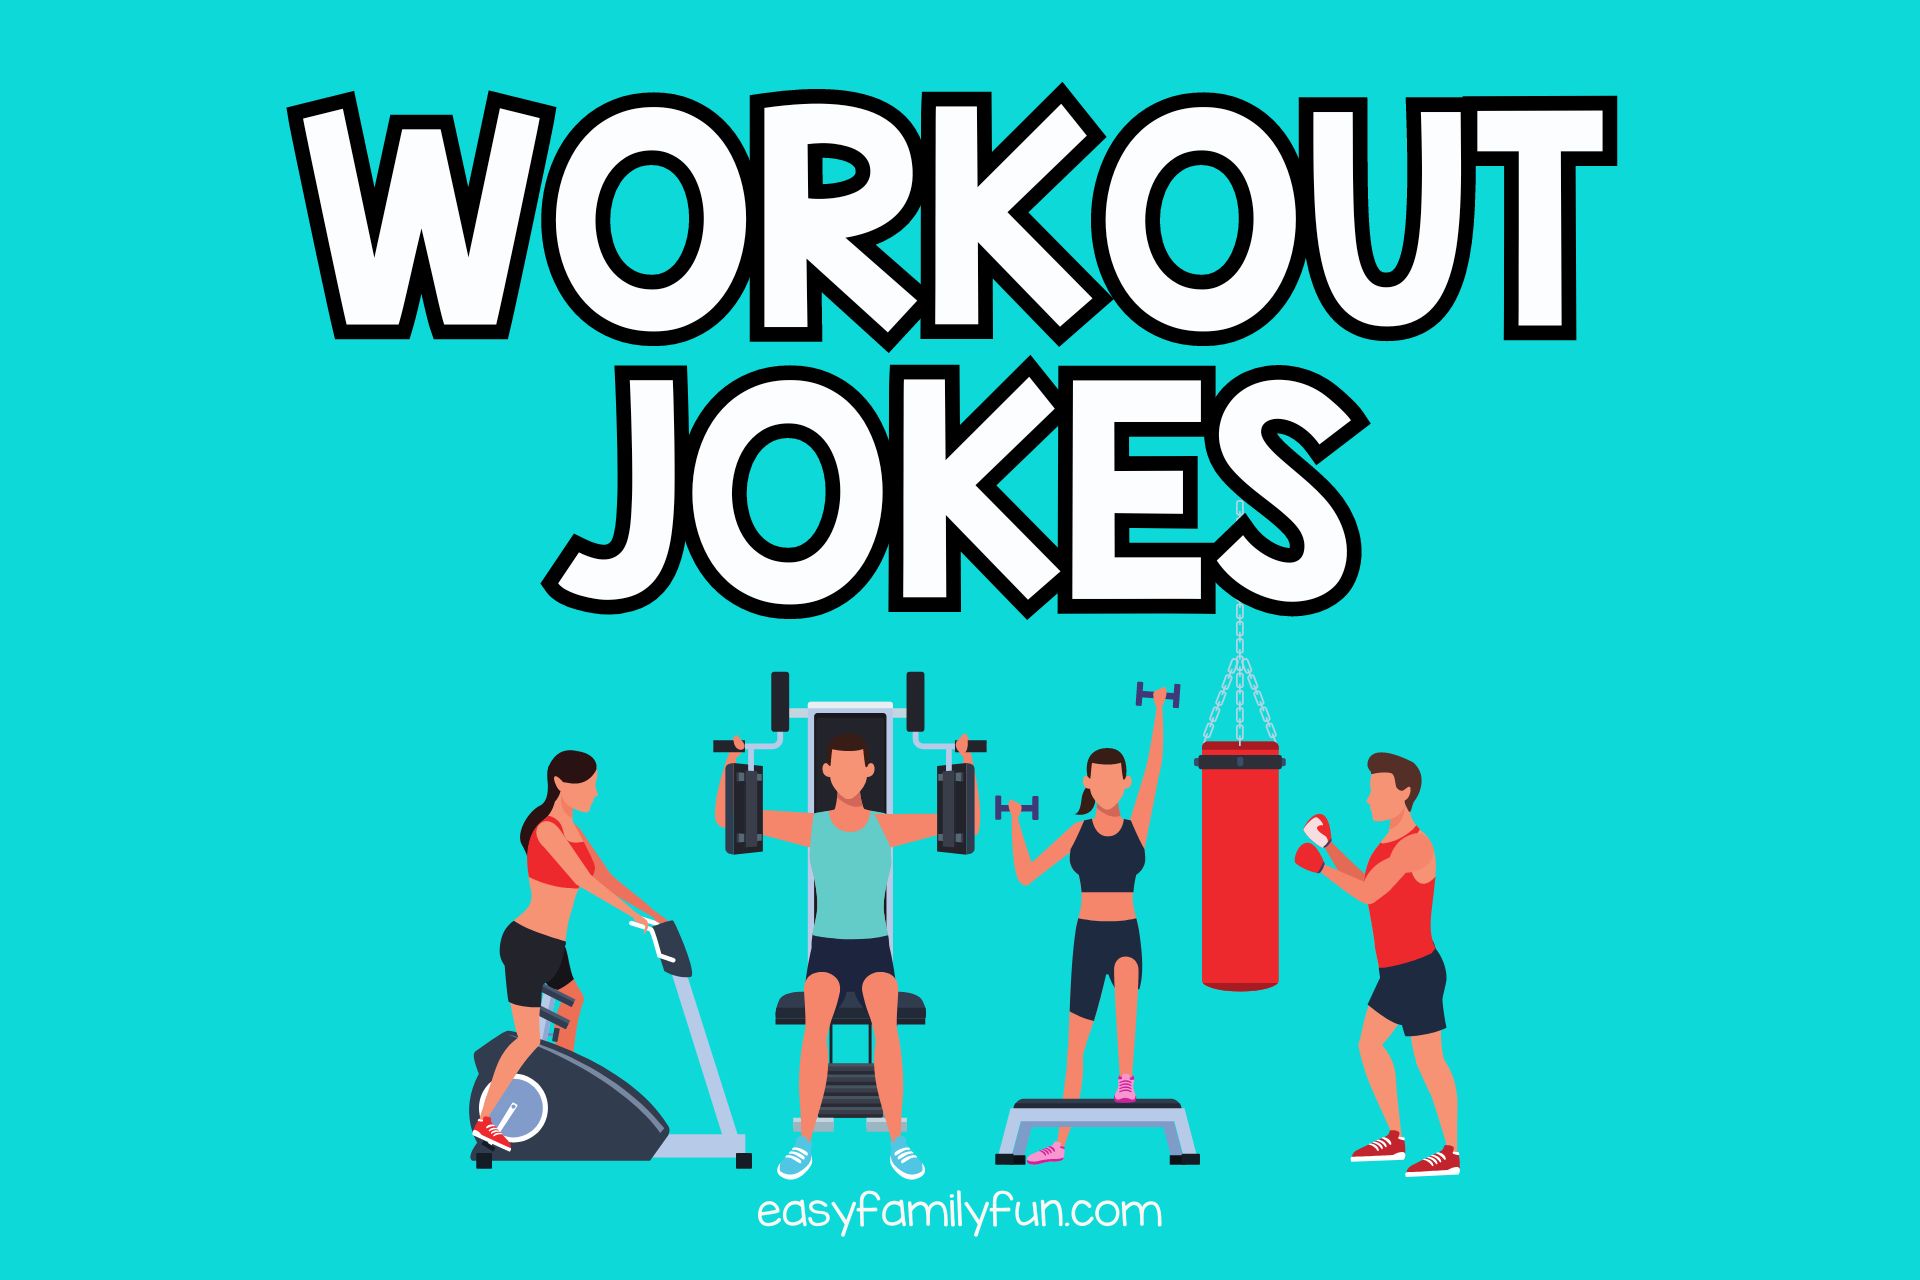 featured image with aqua blue background and white text that says “Workout Jokes"